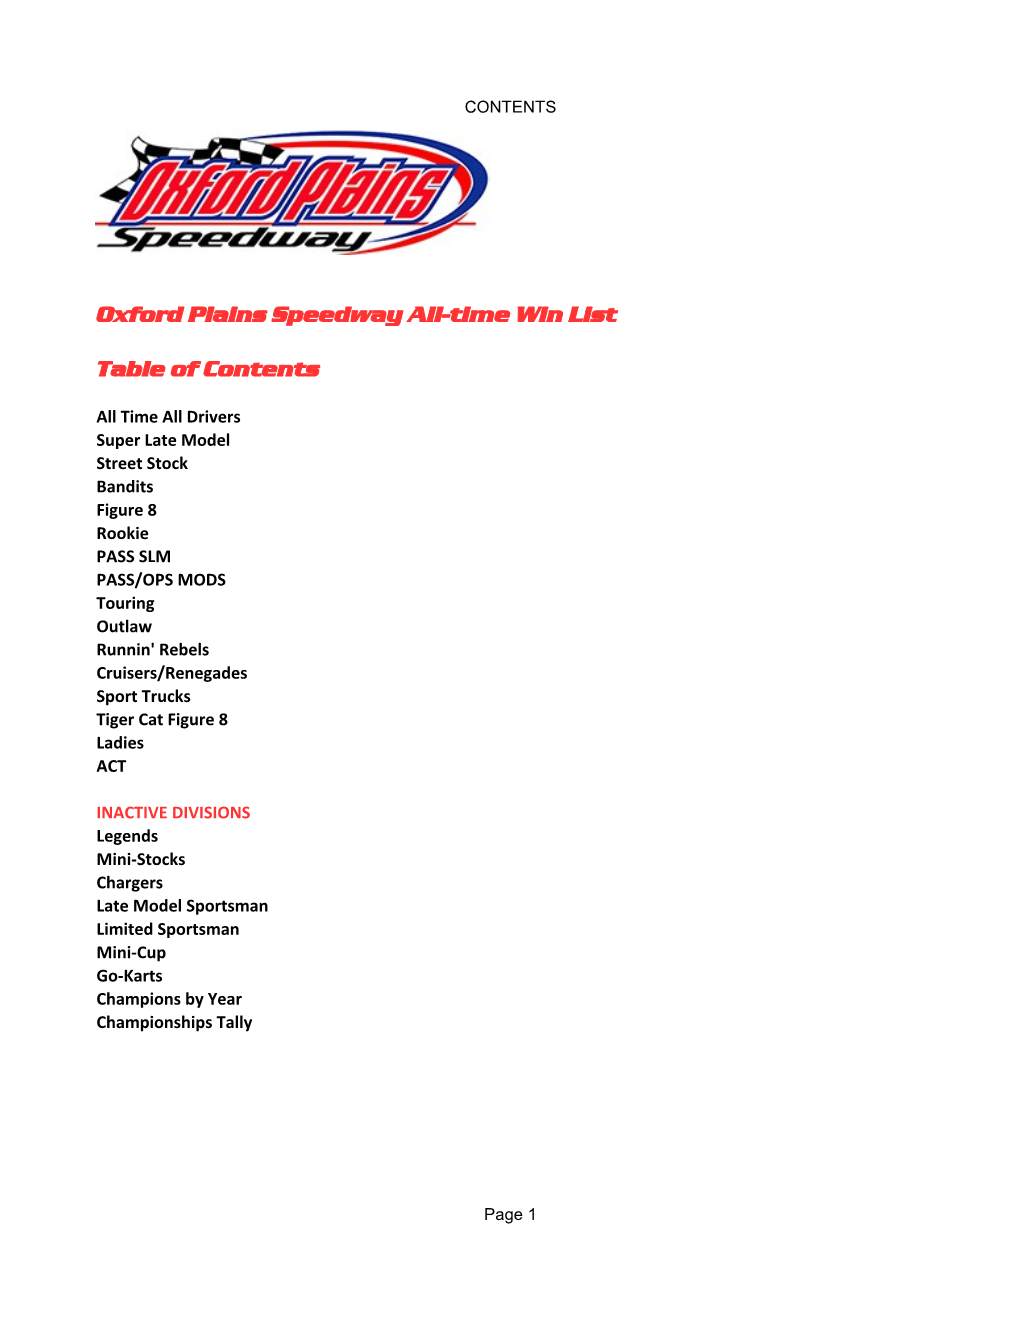 Oxford Plains Speedway All-Time Win List Table of Contents